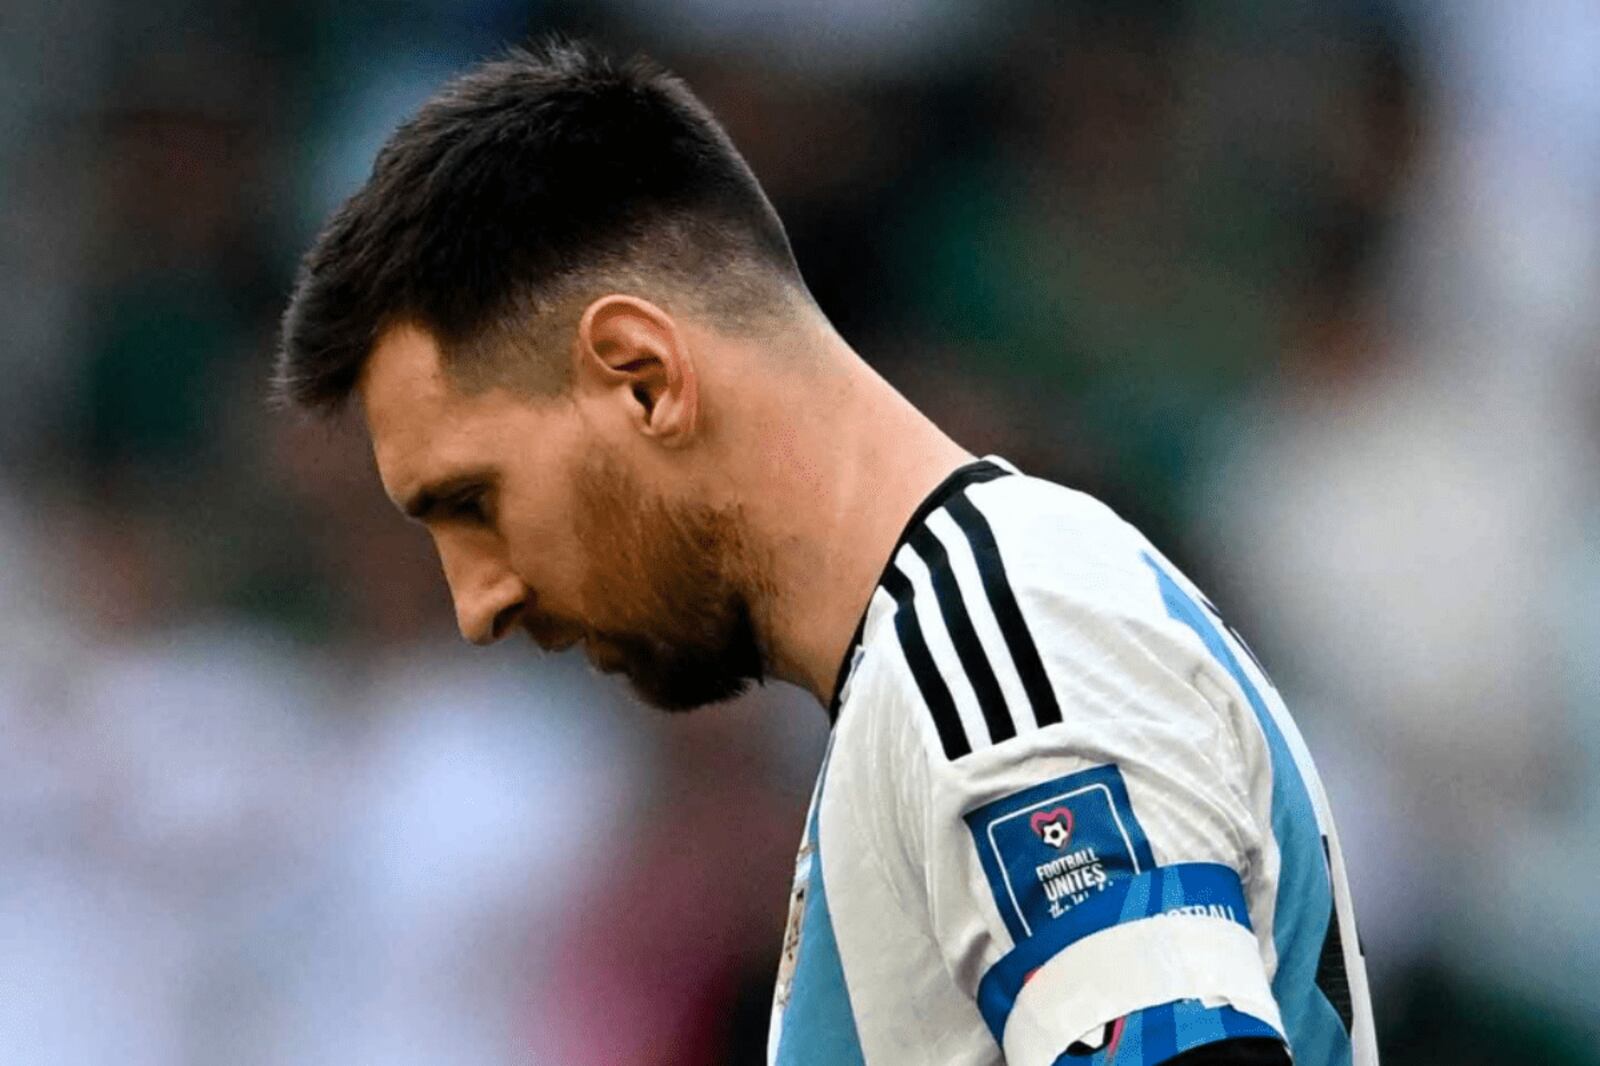 He was key to Messi's World Cup, now he's going through a terrible streak and they want to kick him out